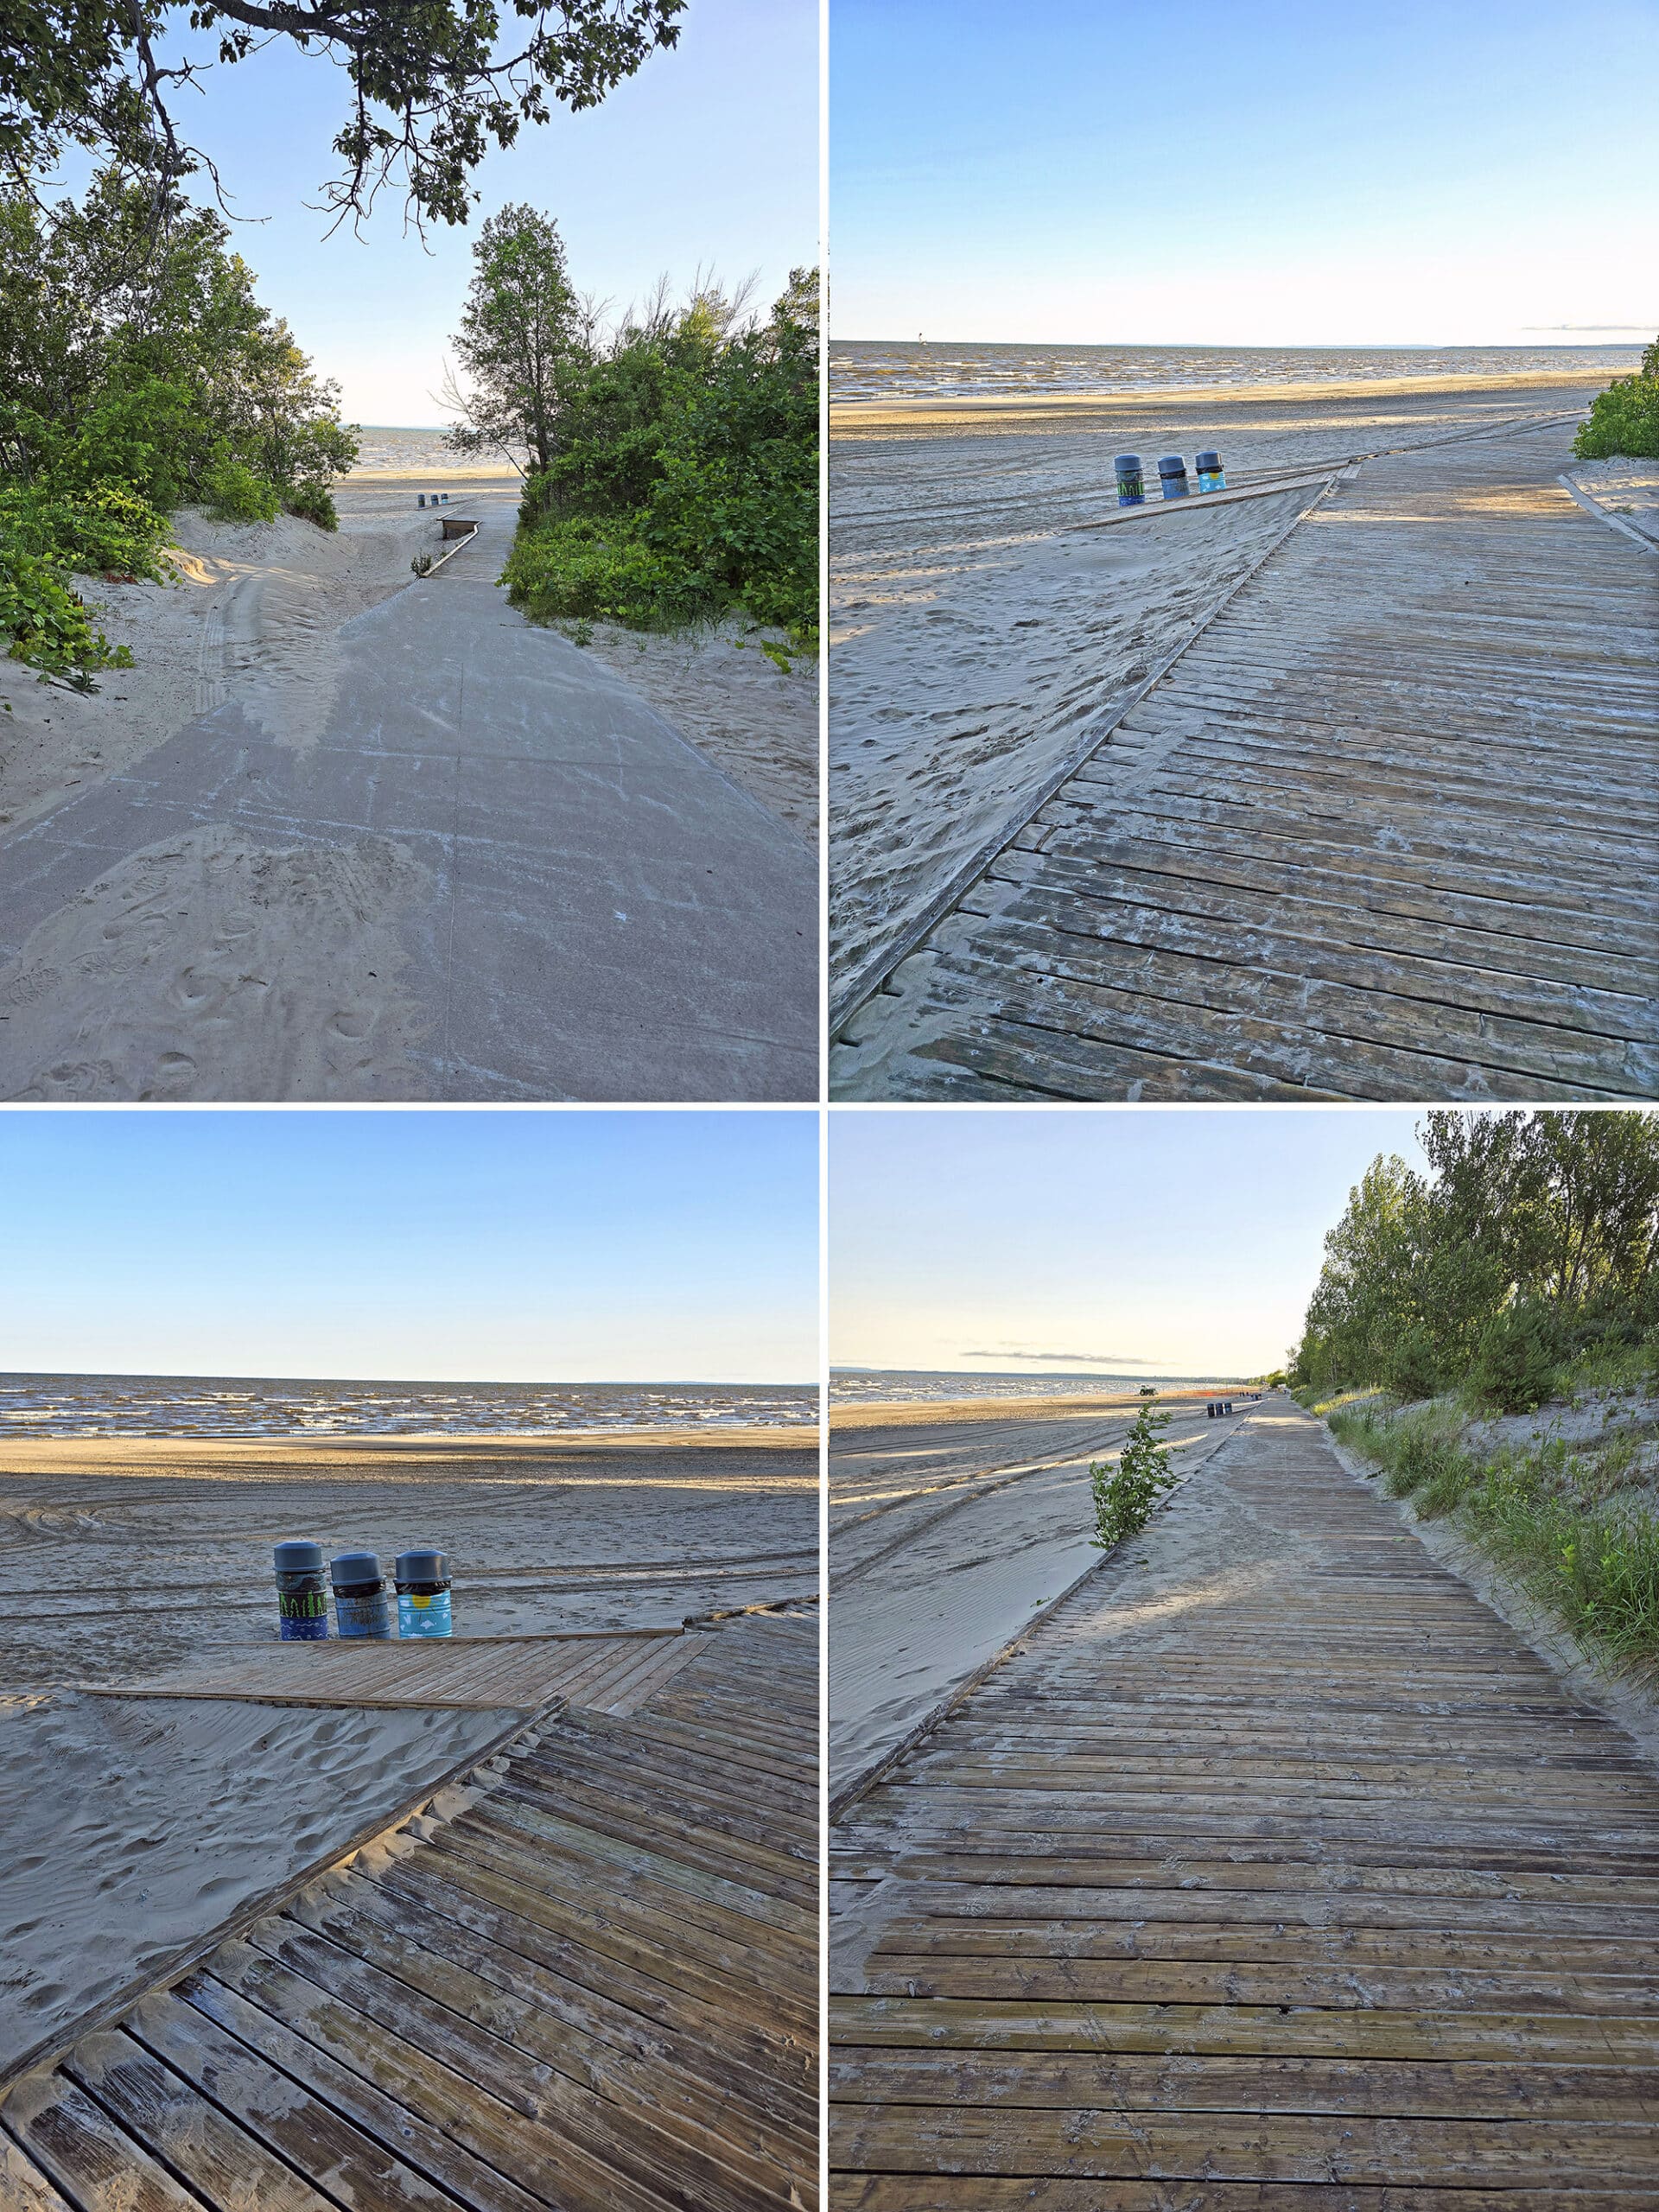 4 part image showing the path to the boardwalk, the boardwalk, and ramps down to the beach at Beach area 2.